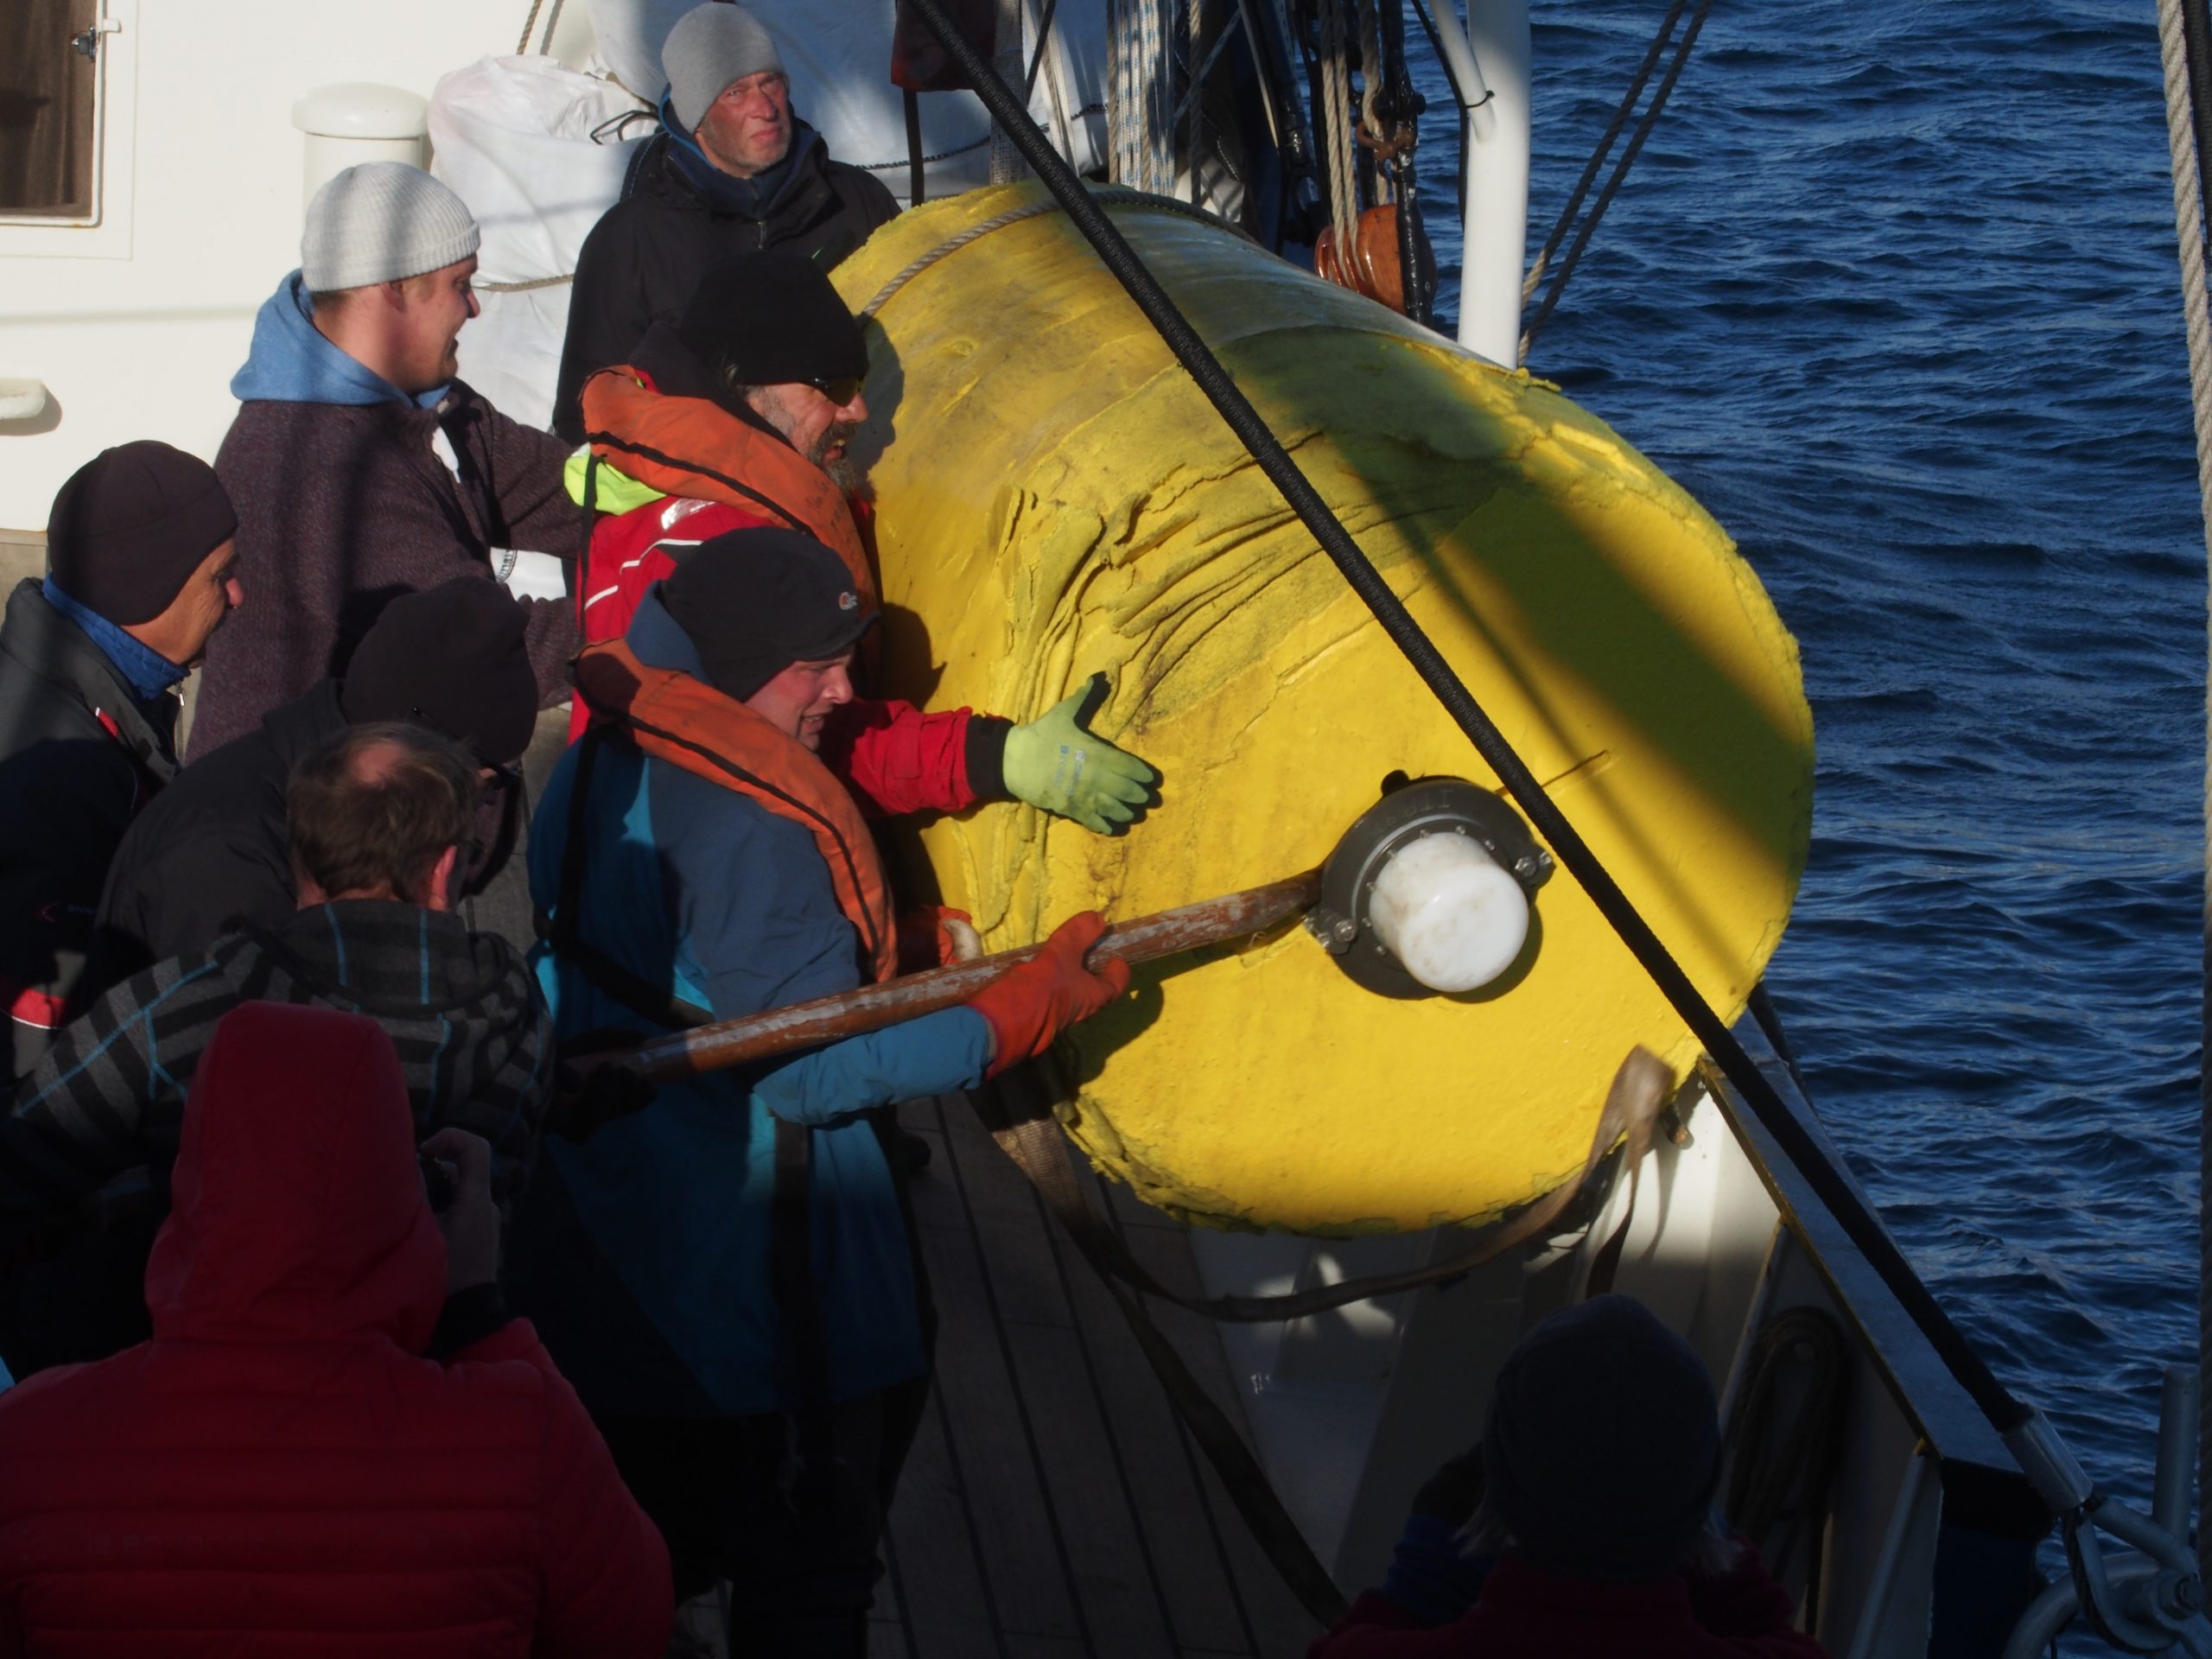 The surface package is hauled onboard the sailing vessel.